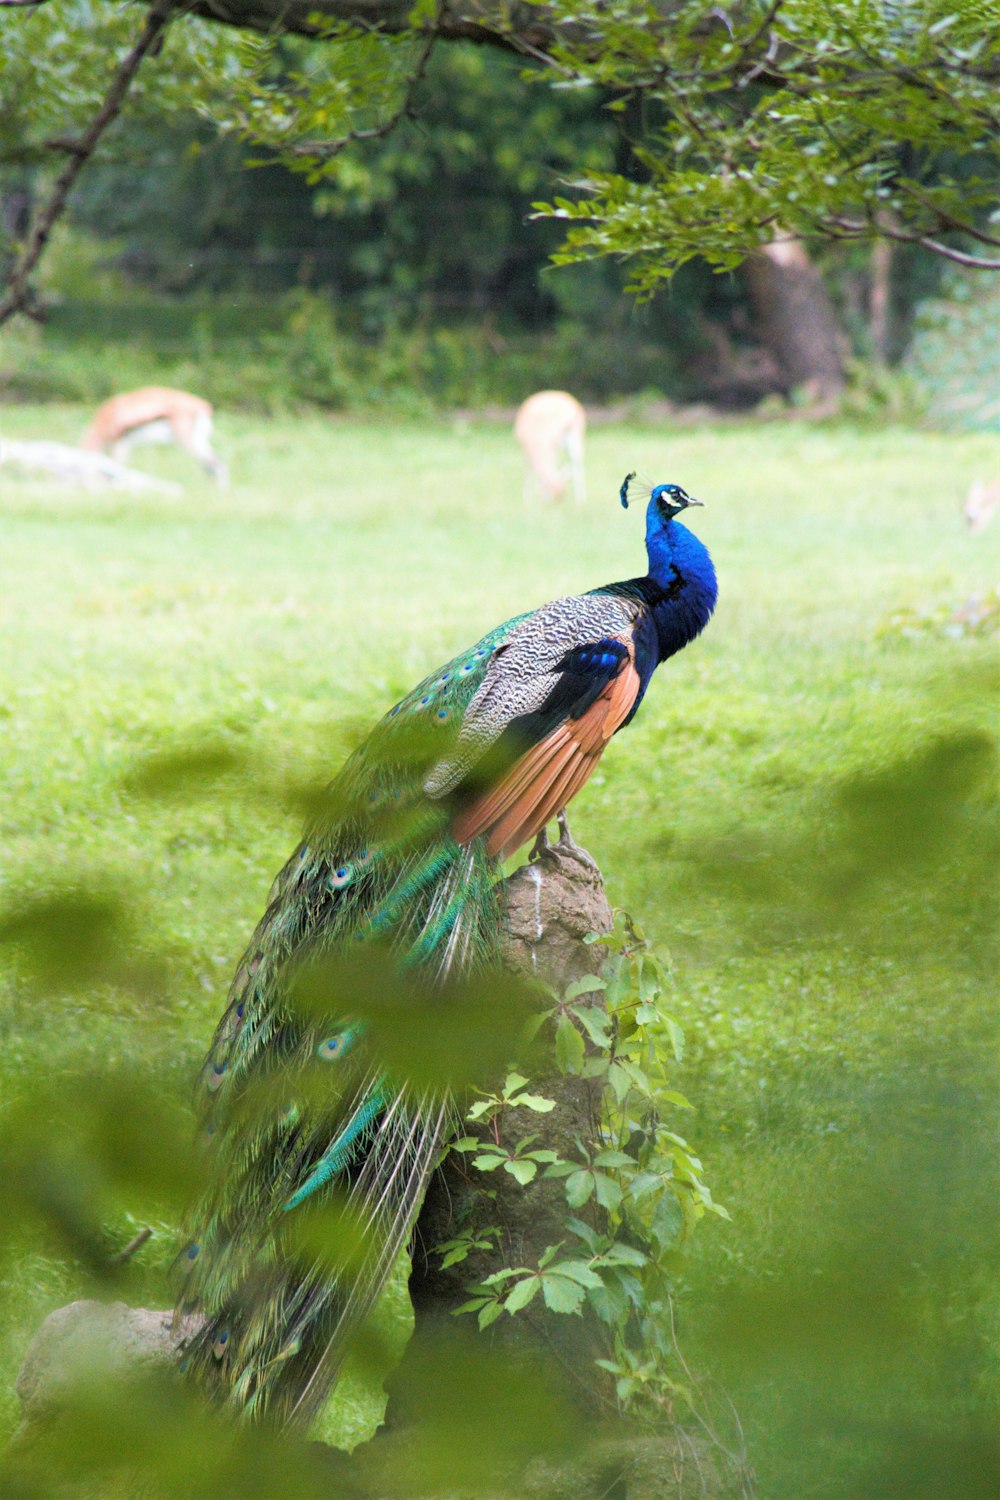 blue peacock on green grass during daytime